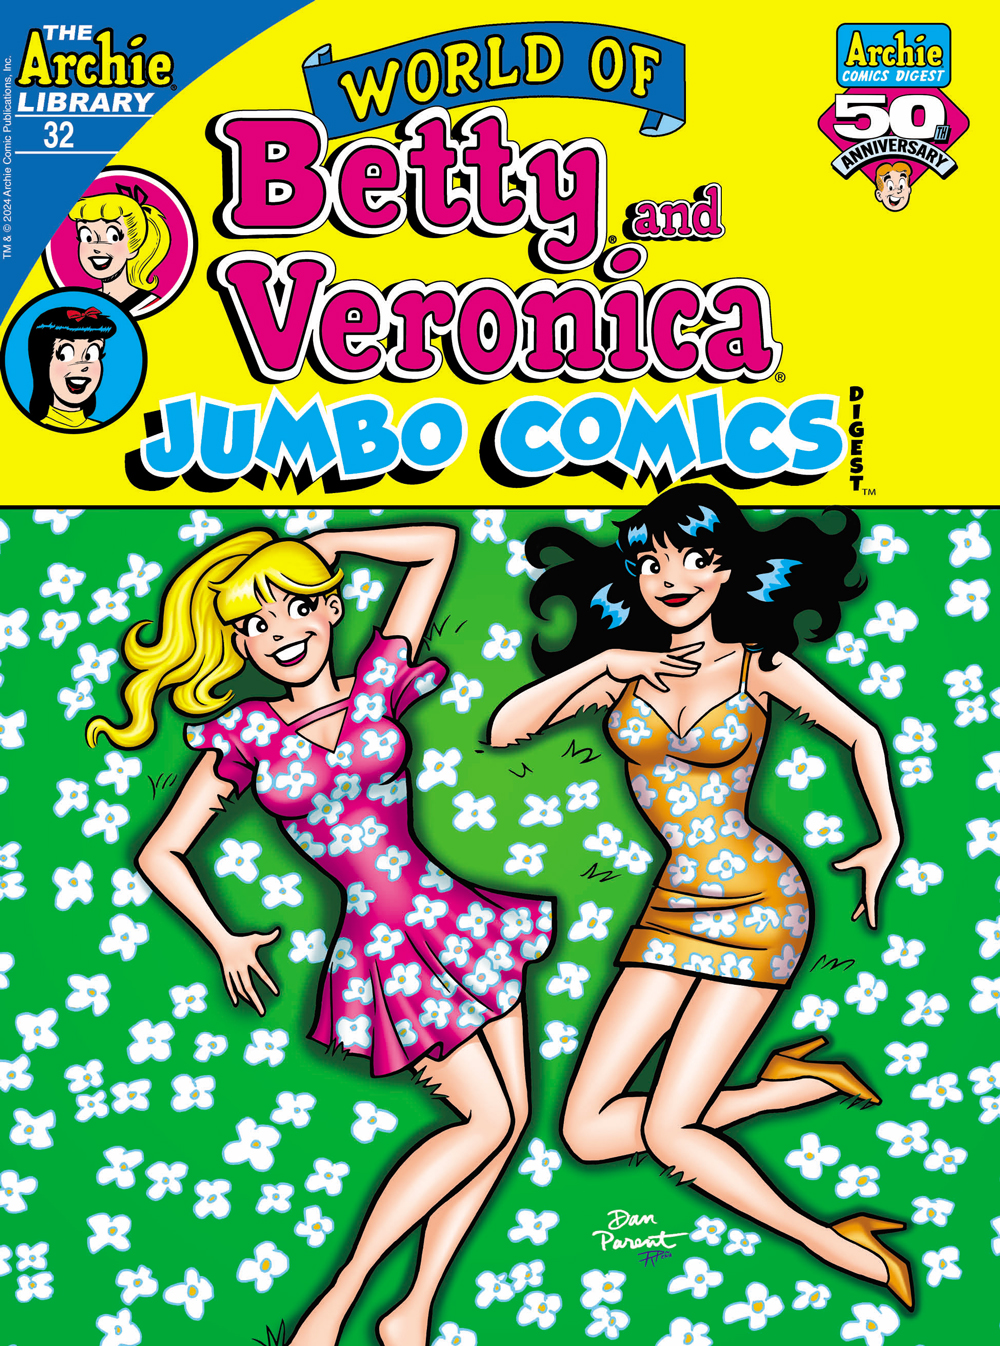 Betty and Veronica lay on a field of daisies, wearing daisy-printed sundresses. The look up smiling at the viewer.